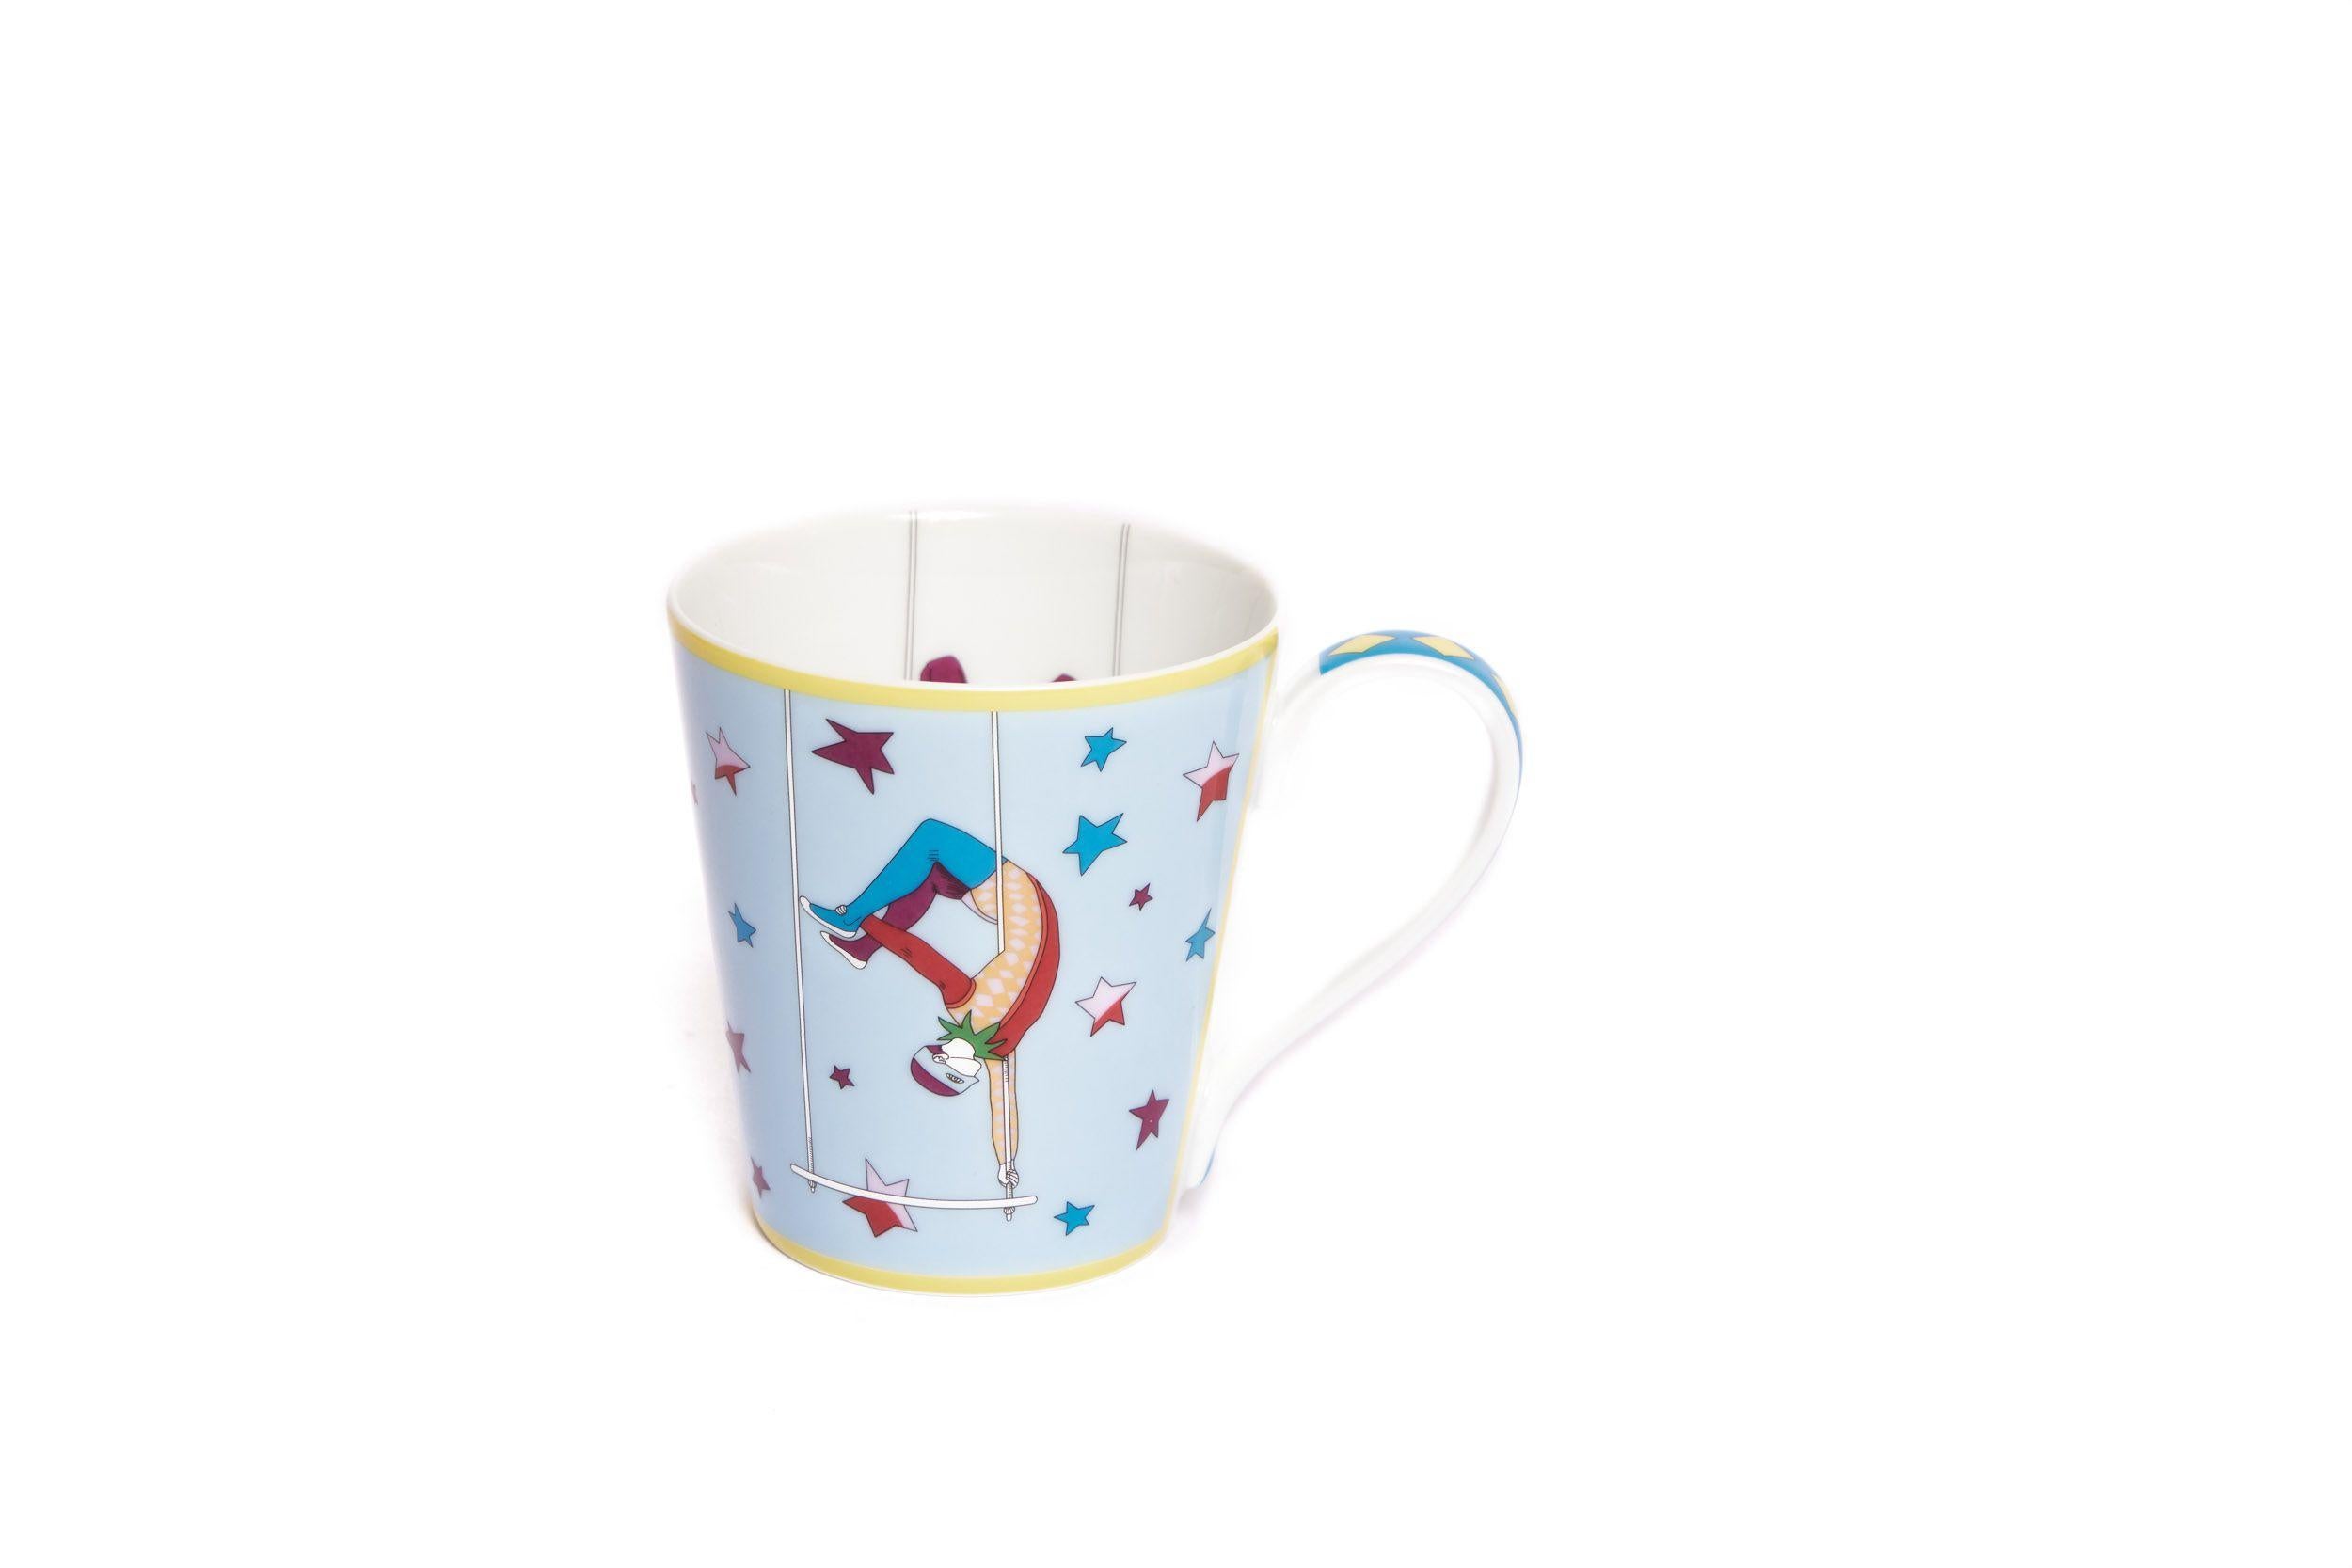 Hermes Circus celeste porcelain cup with multicolor stars, new in unused condition. Comes with original box.